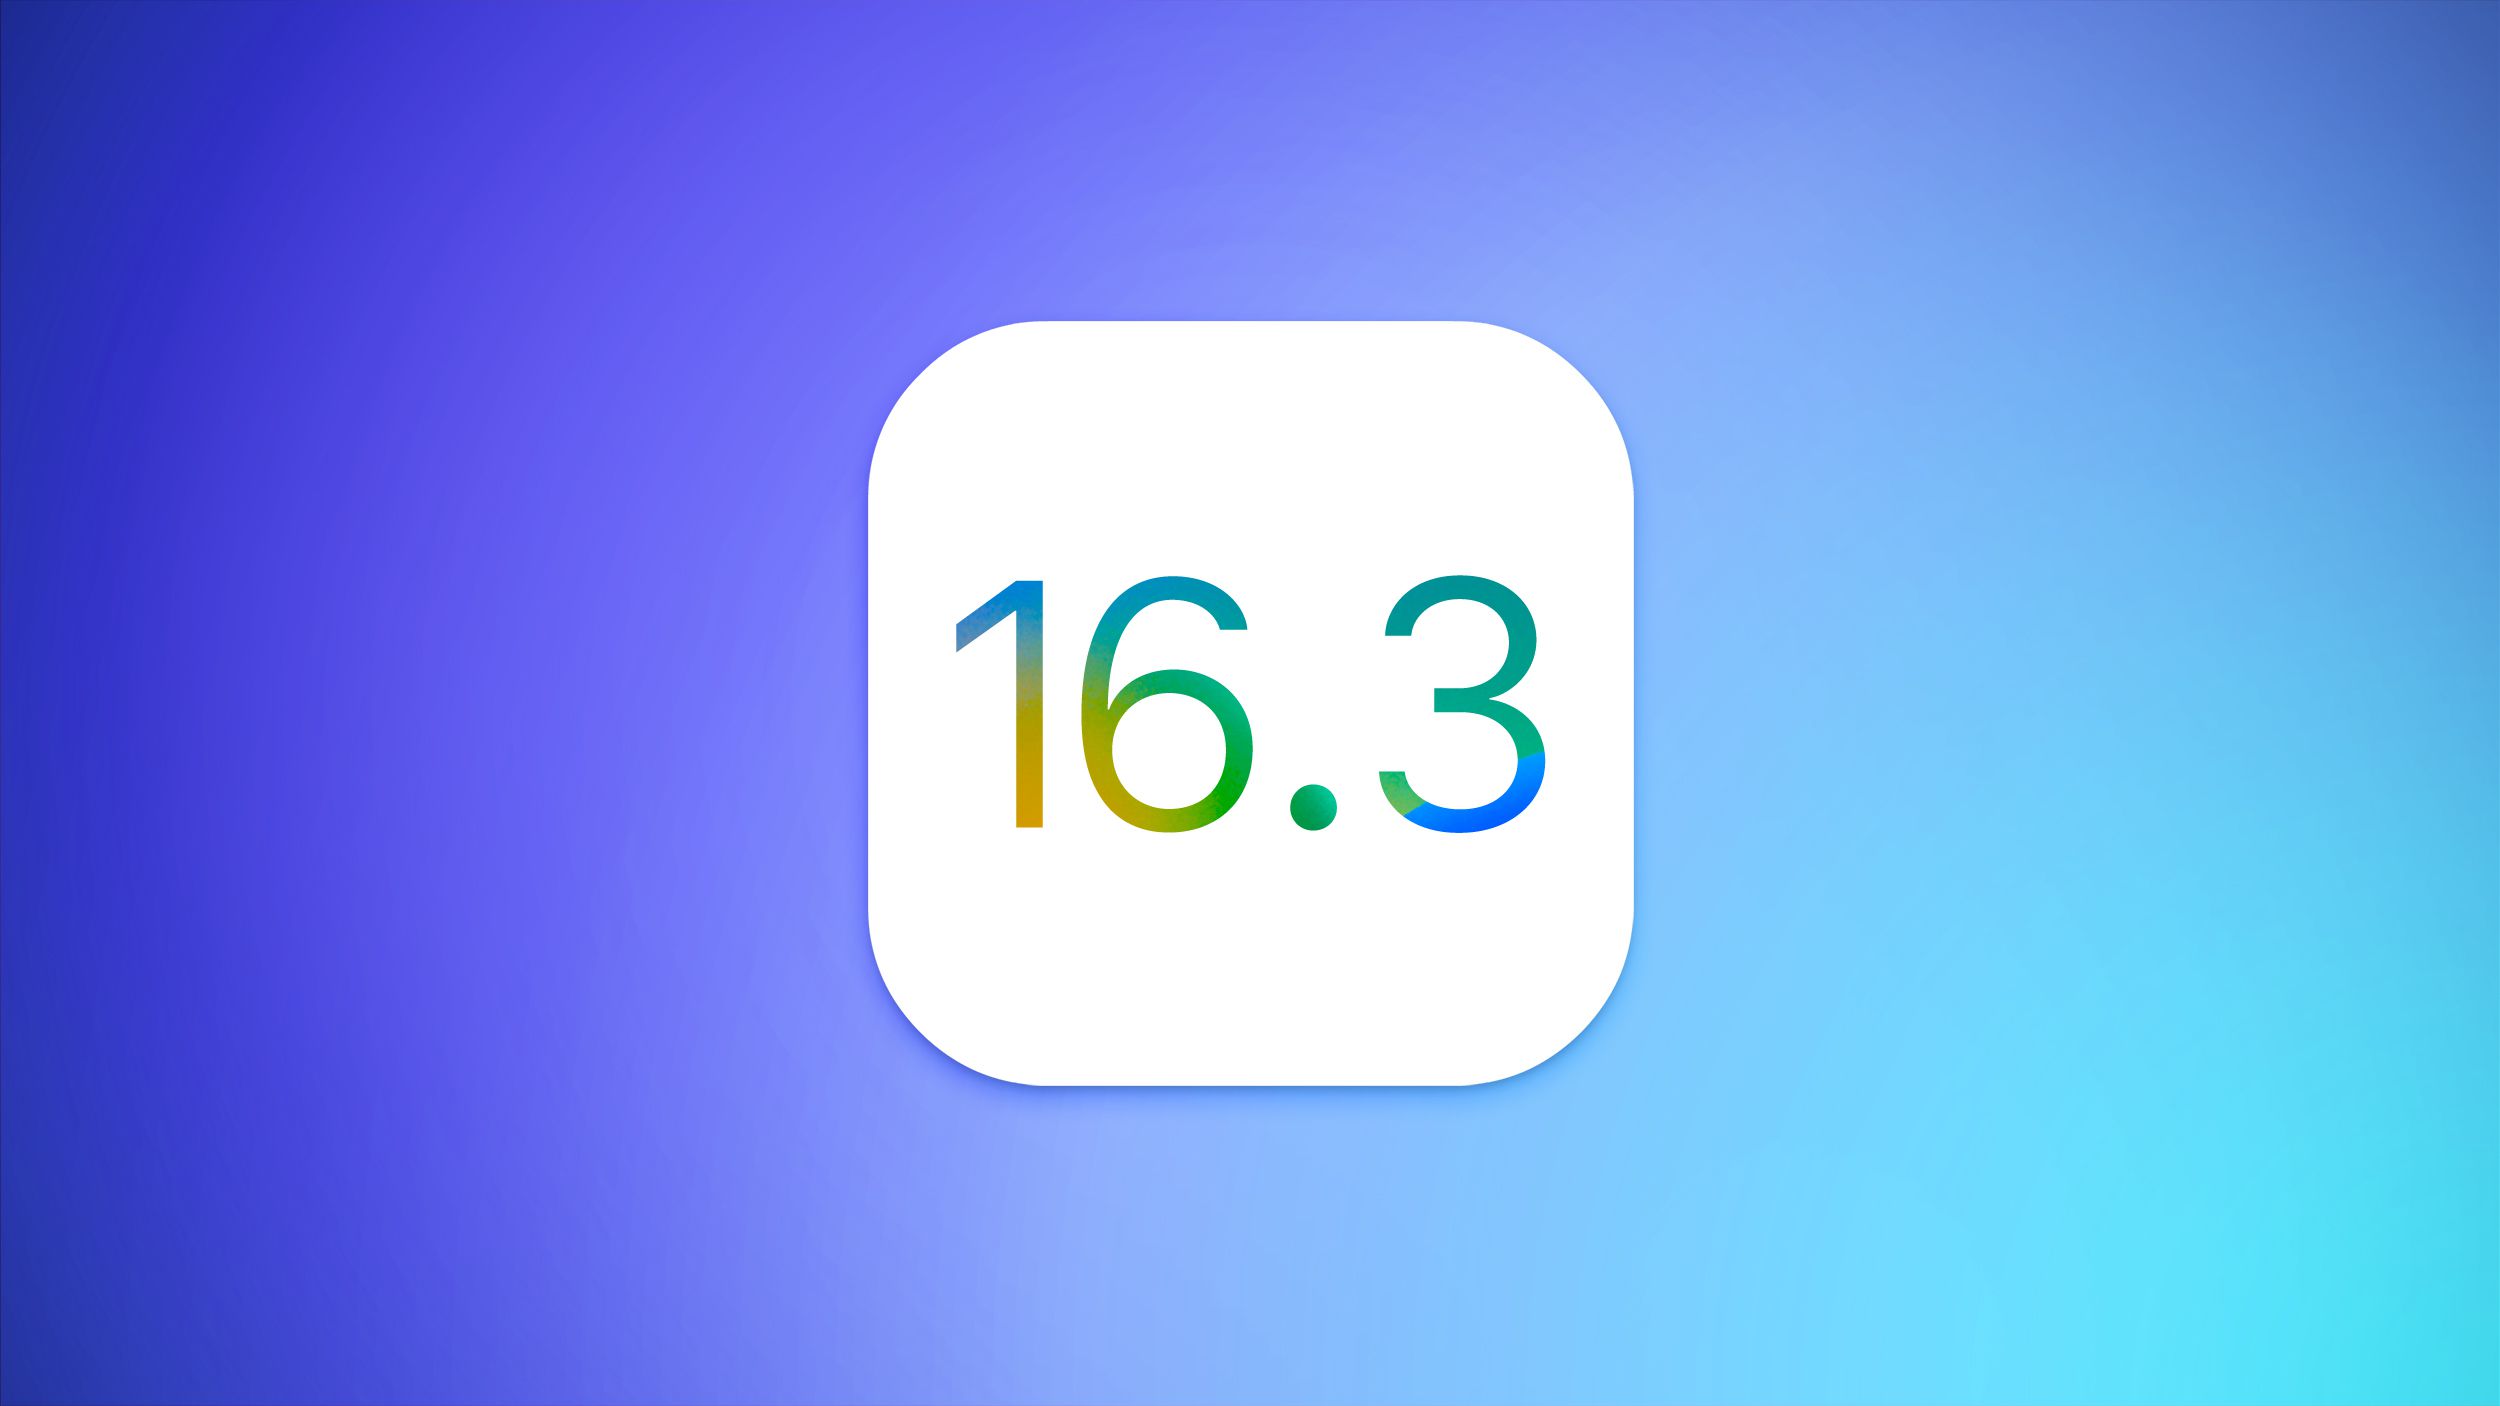 Apple today released iOS 16.3, the third major update to the iOS 16 operating system that first came out in September. iOS 16.3 comes over a month aft